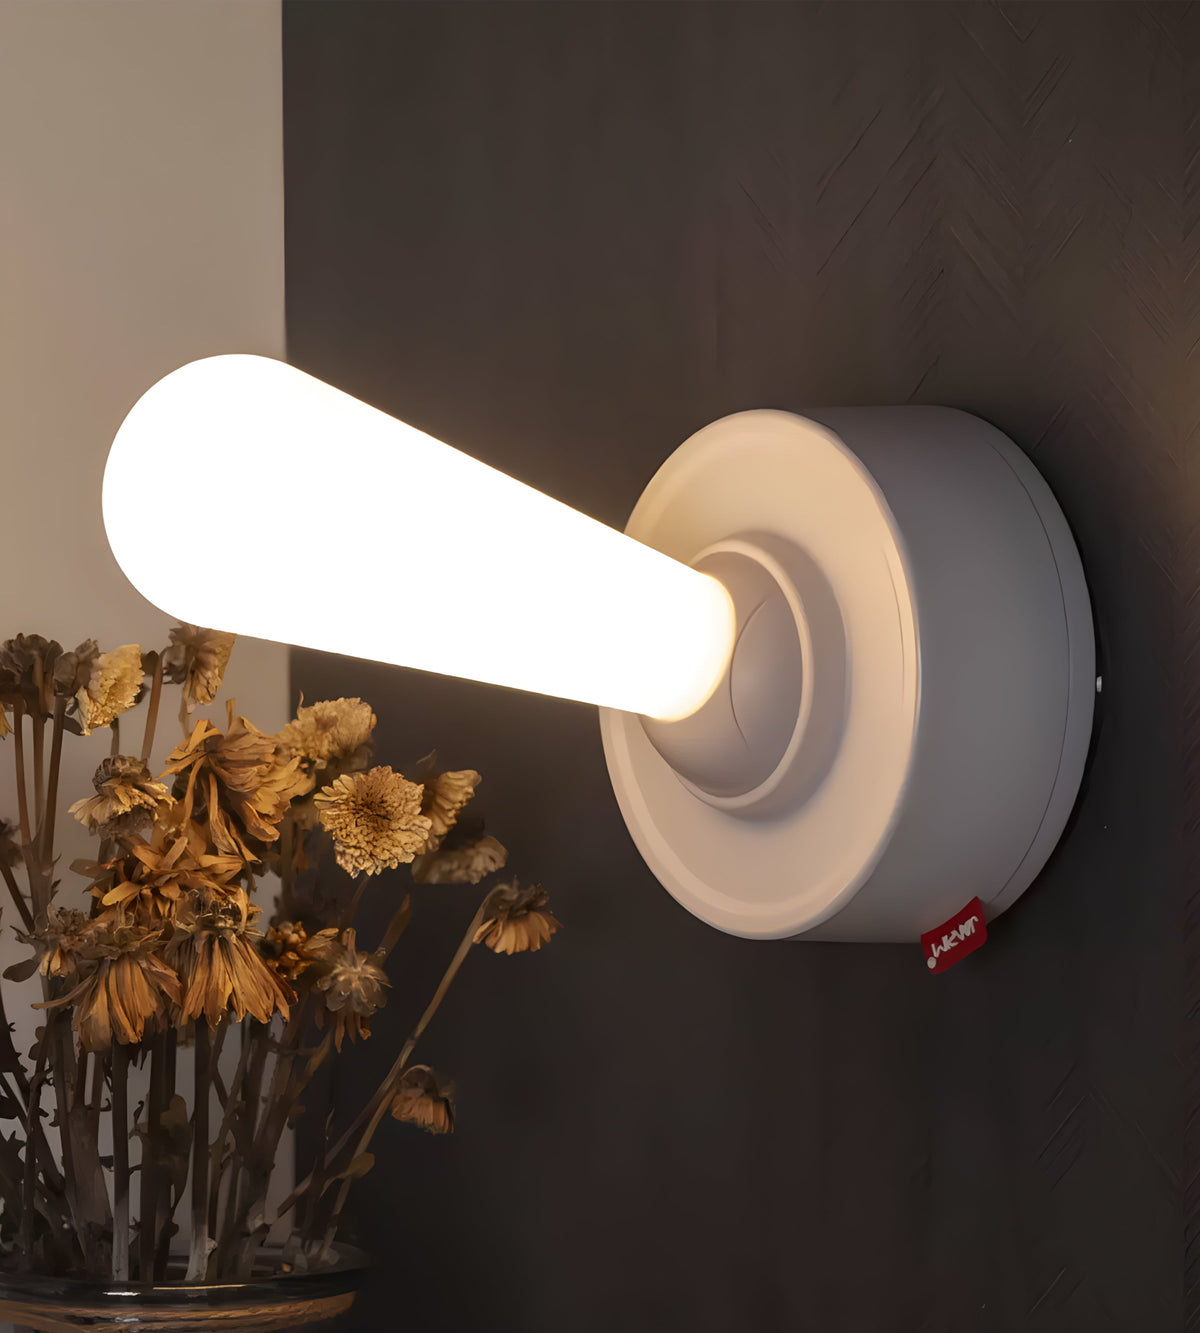 Lever Light Dial the switch light creative home atmosphere lighting inspiration design